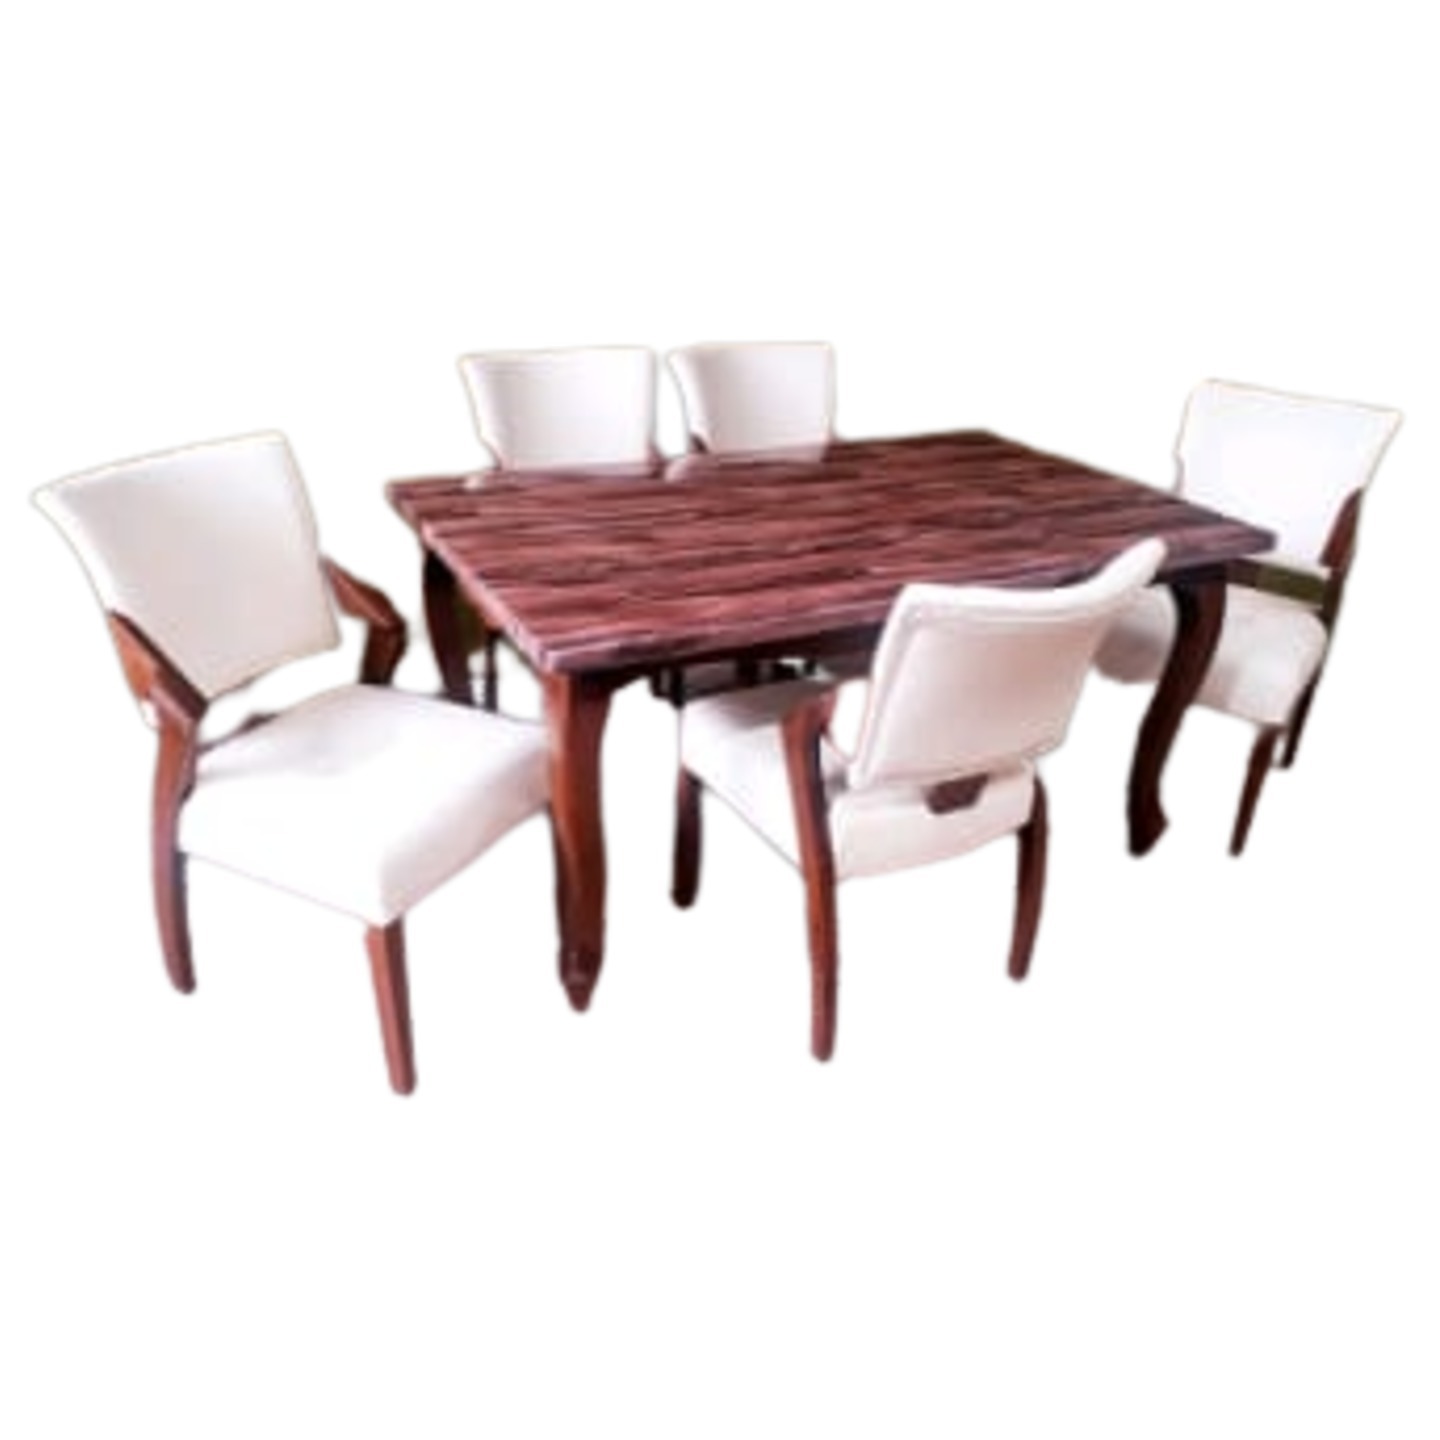 DW Marble Top H-011 Four Seater Dining Table Set in Brown Colour